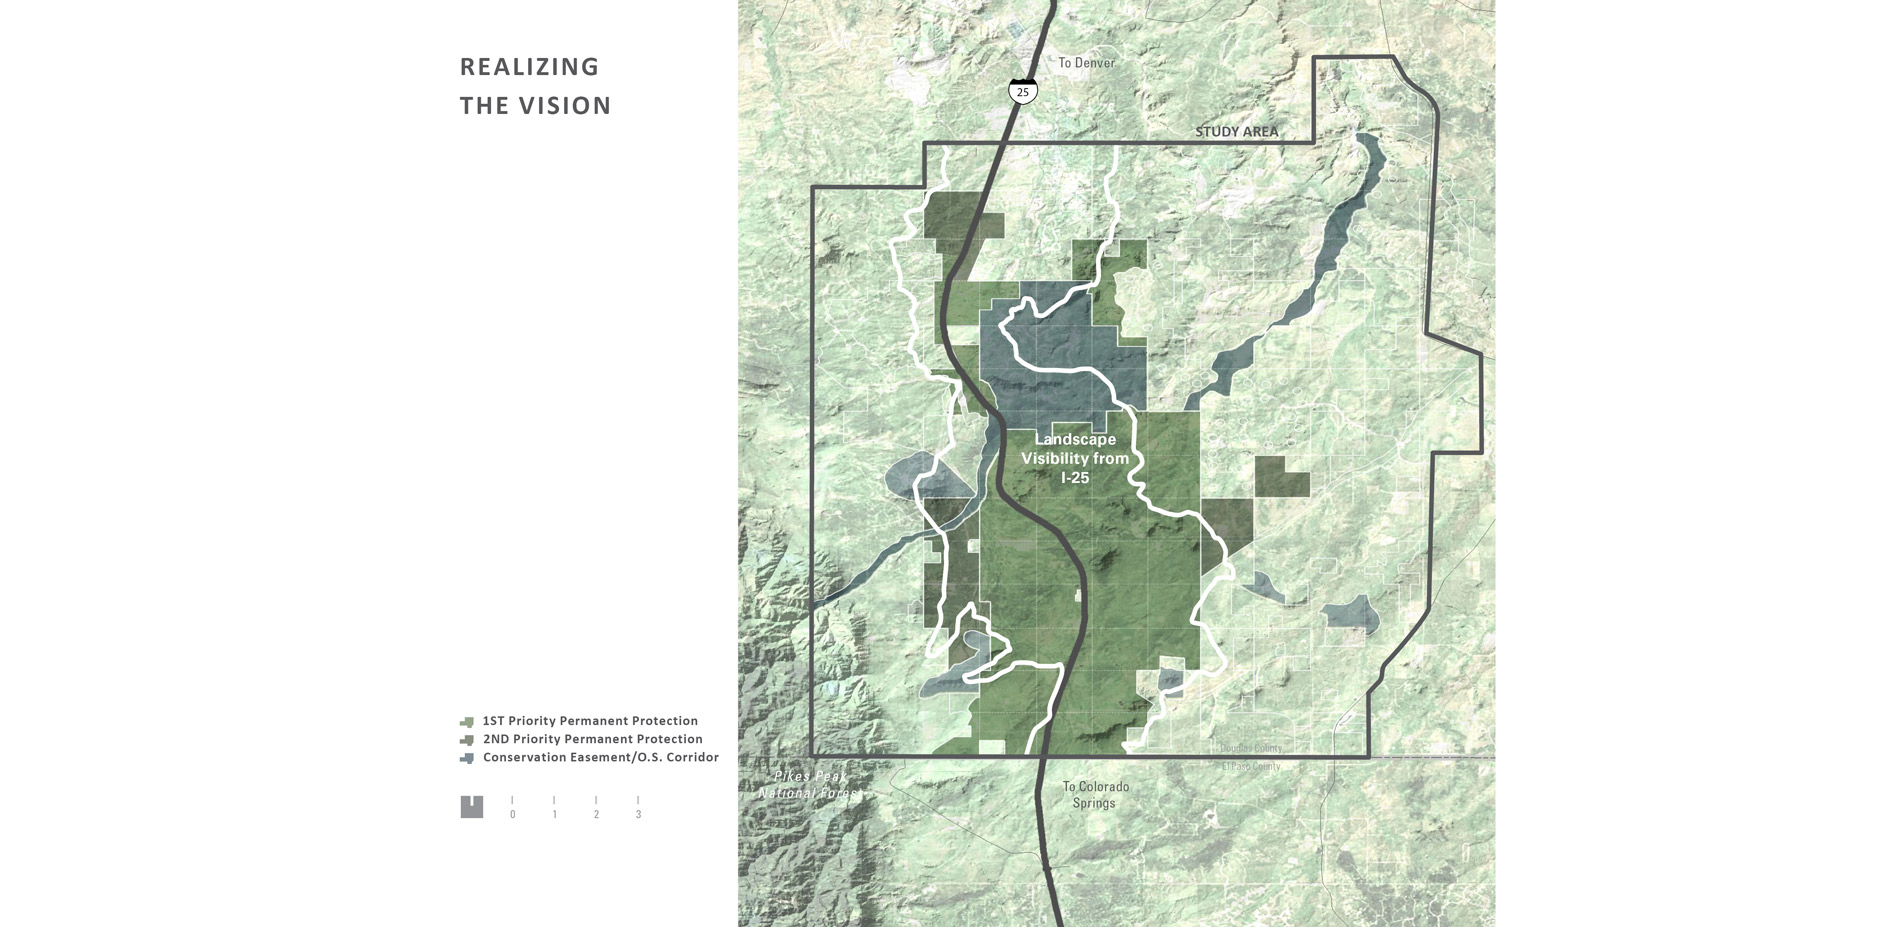 The principal technique used to protect priority areas identified in the plan was acquisition of critical lands. Conservation easements were used to p…